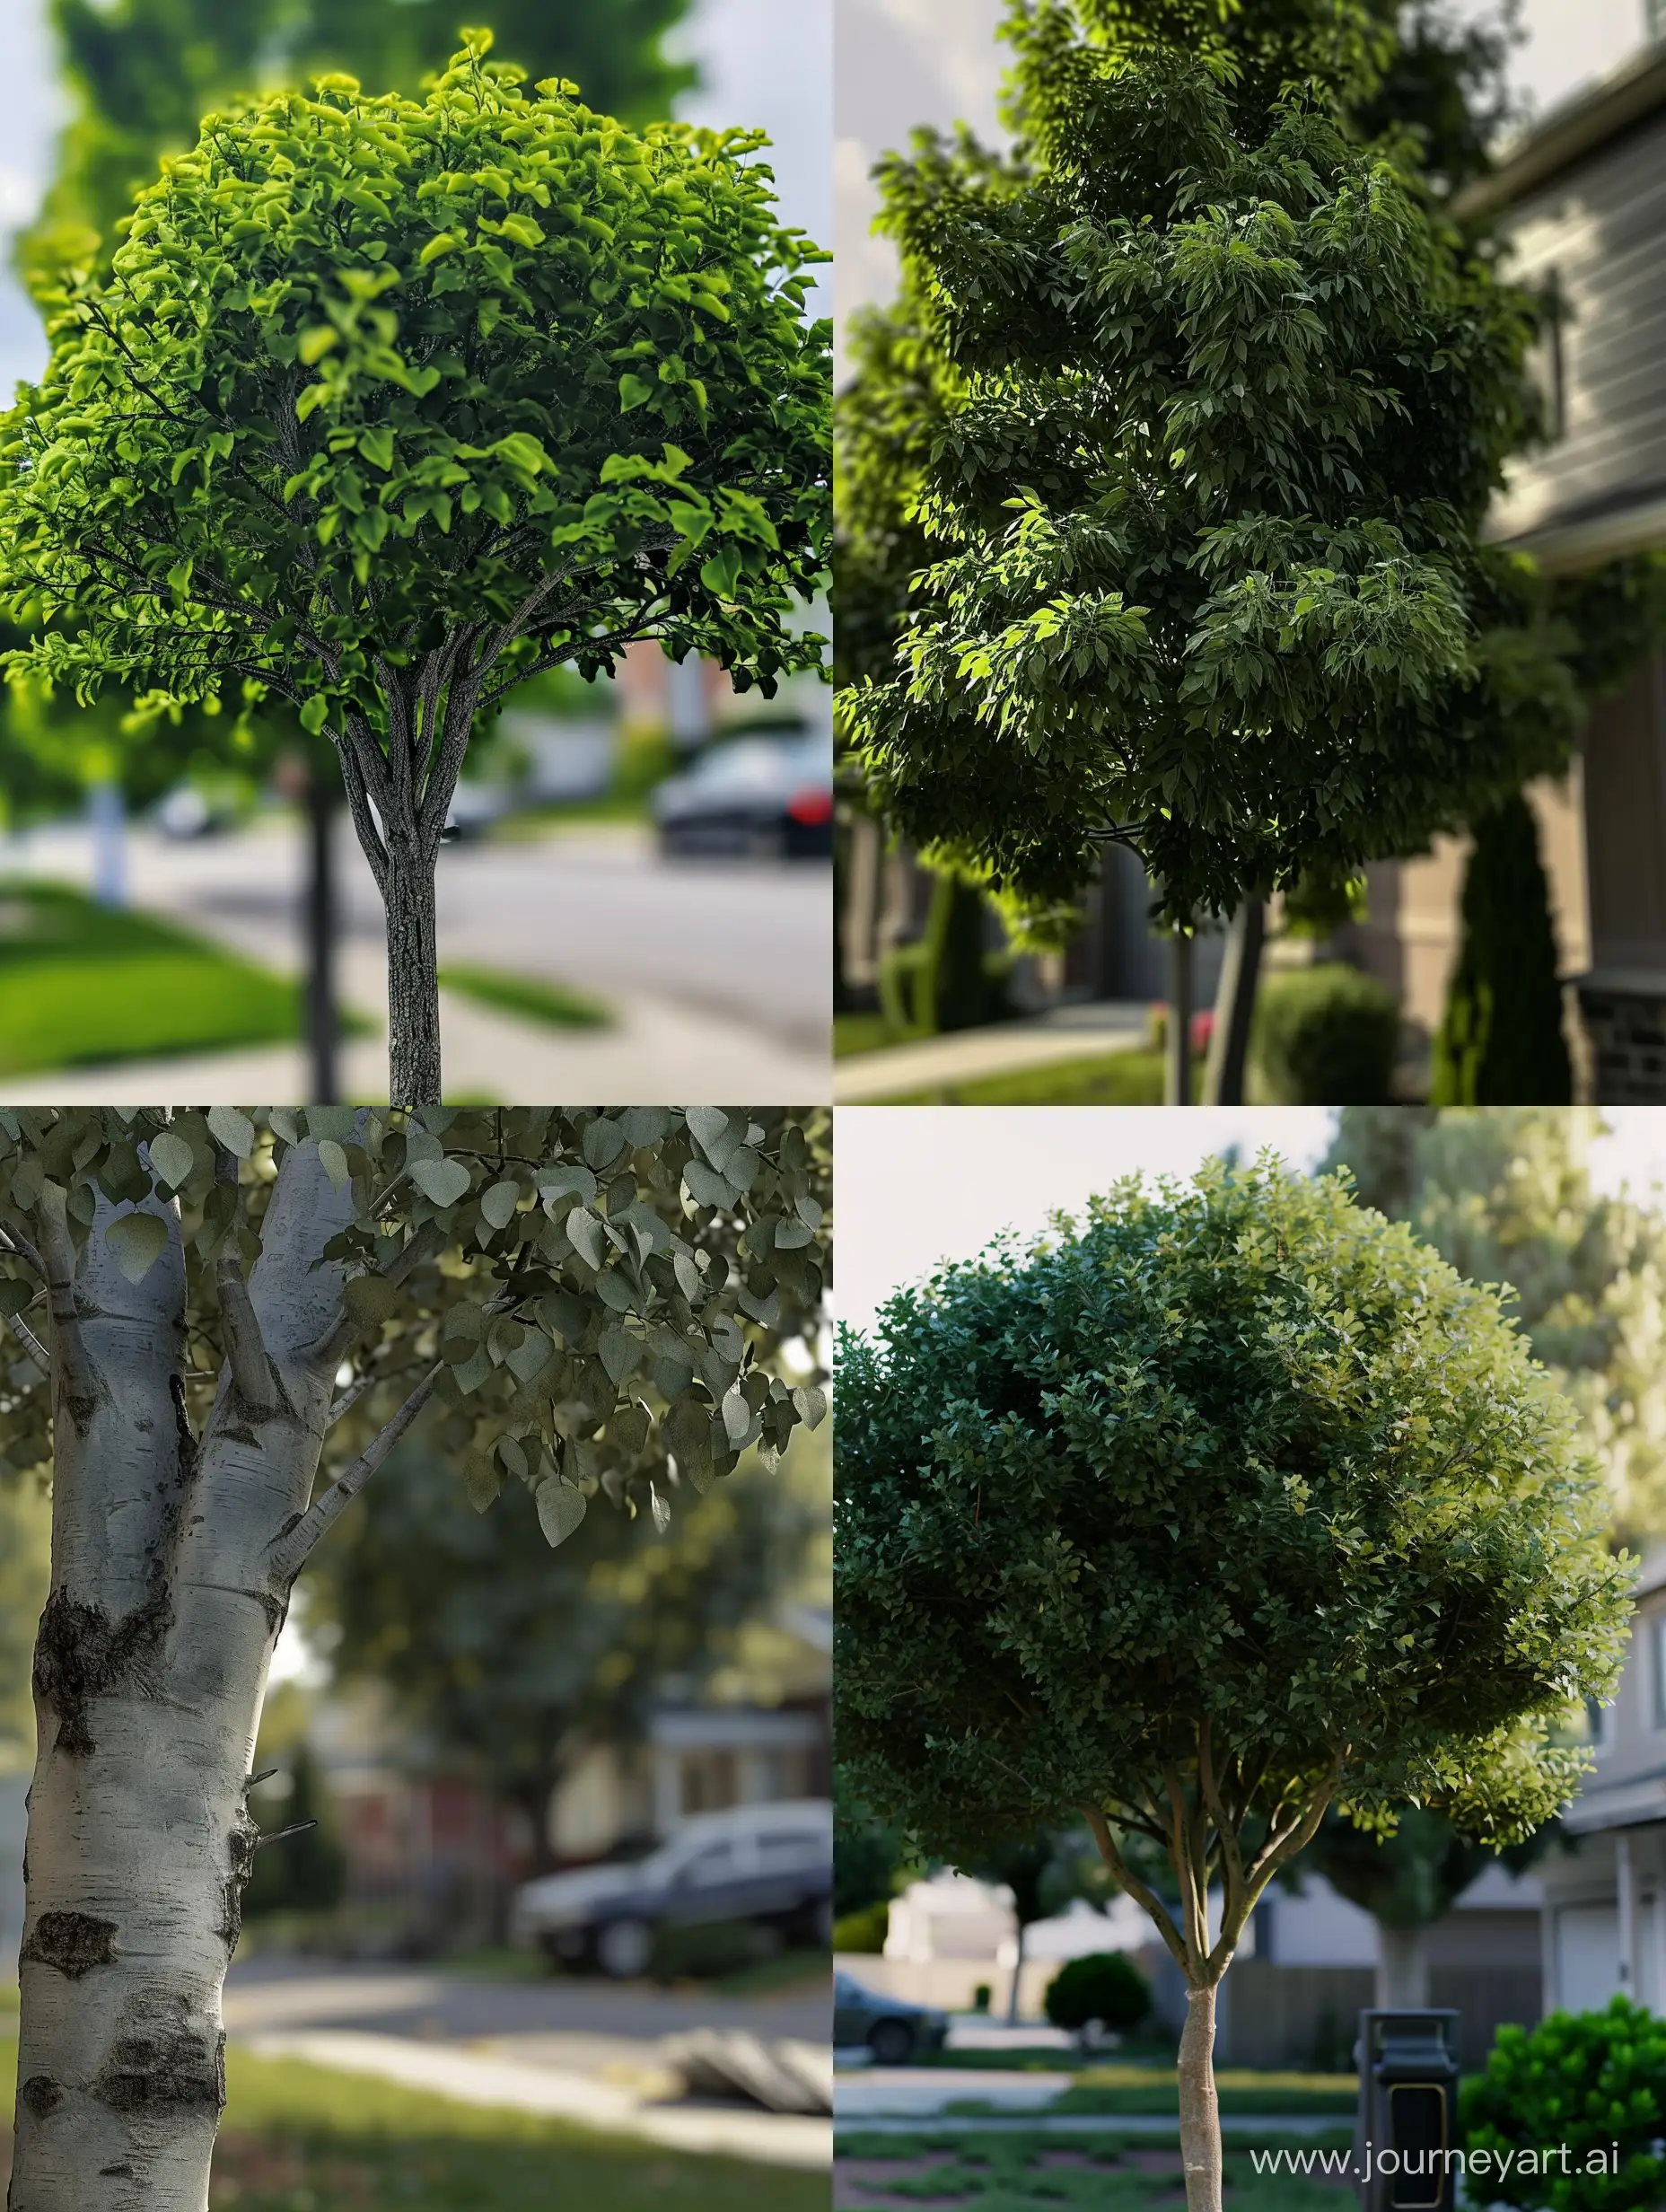 MediumTall-Tree-Captured-in-Detailed-Realism-in-Suburban-Landscape